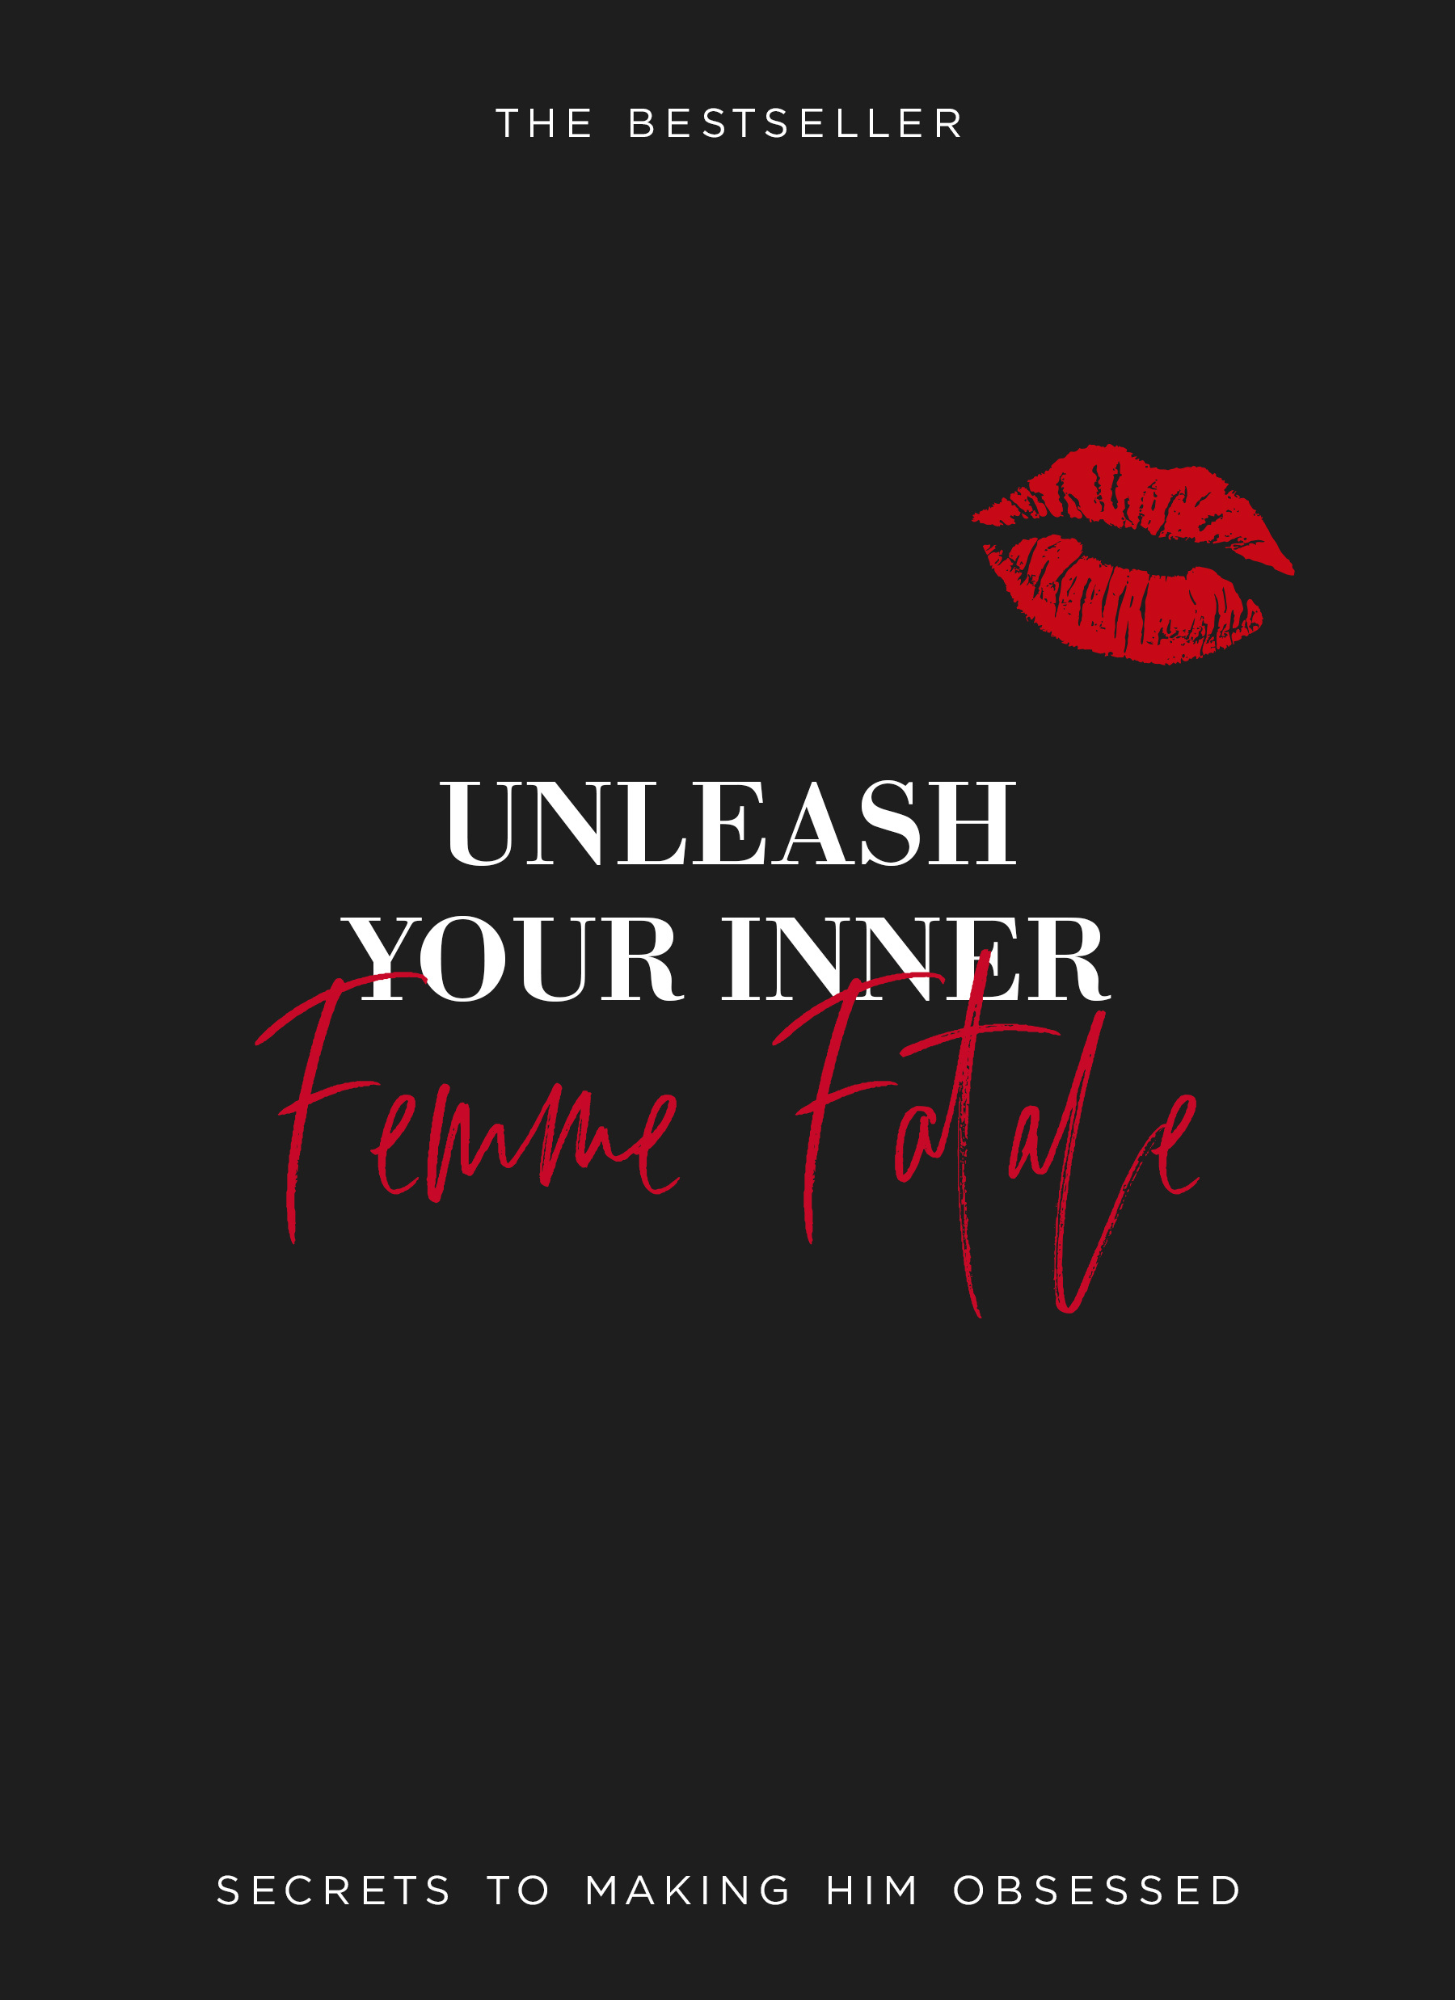 15 Ways On How To Be A Femme Fatale! - HubPages